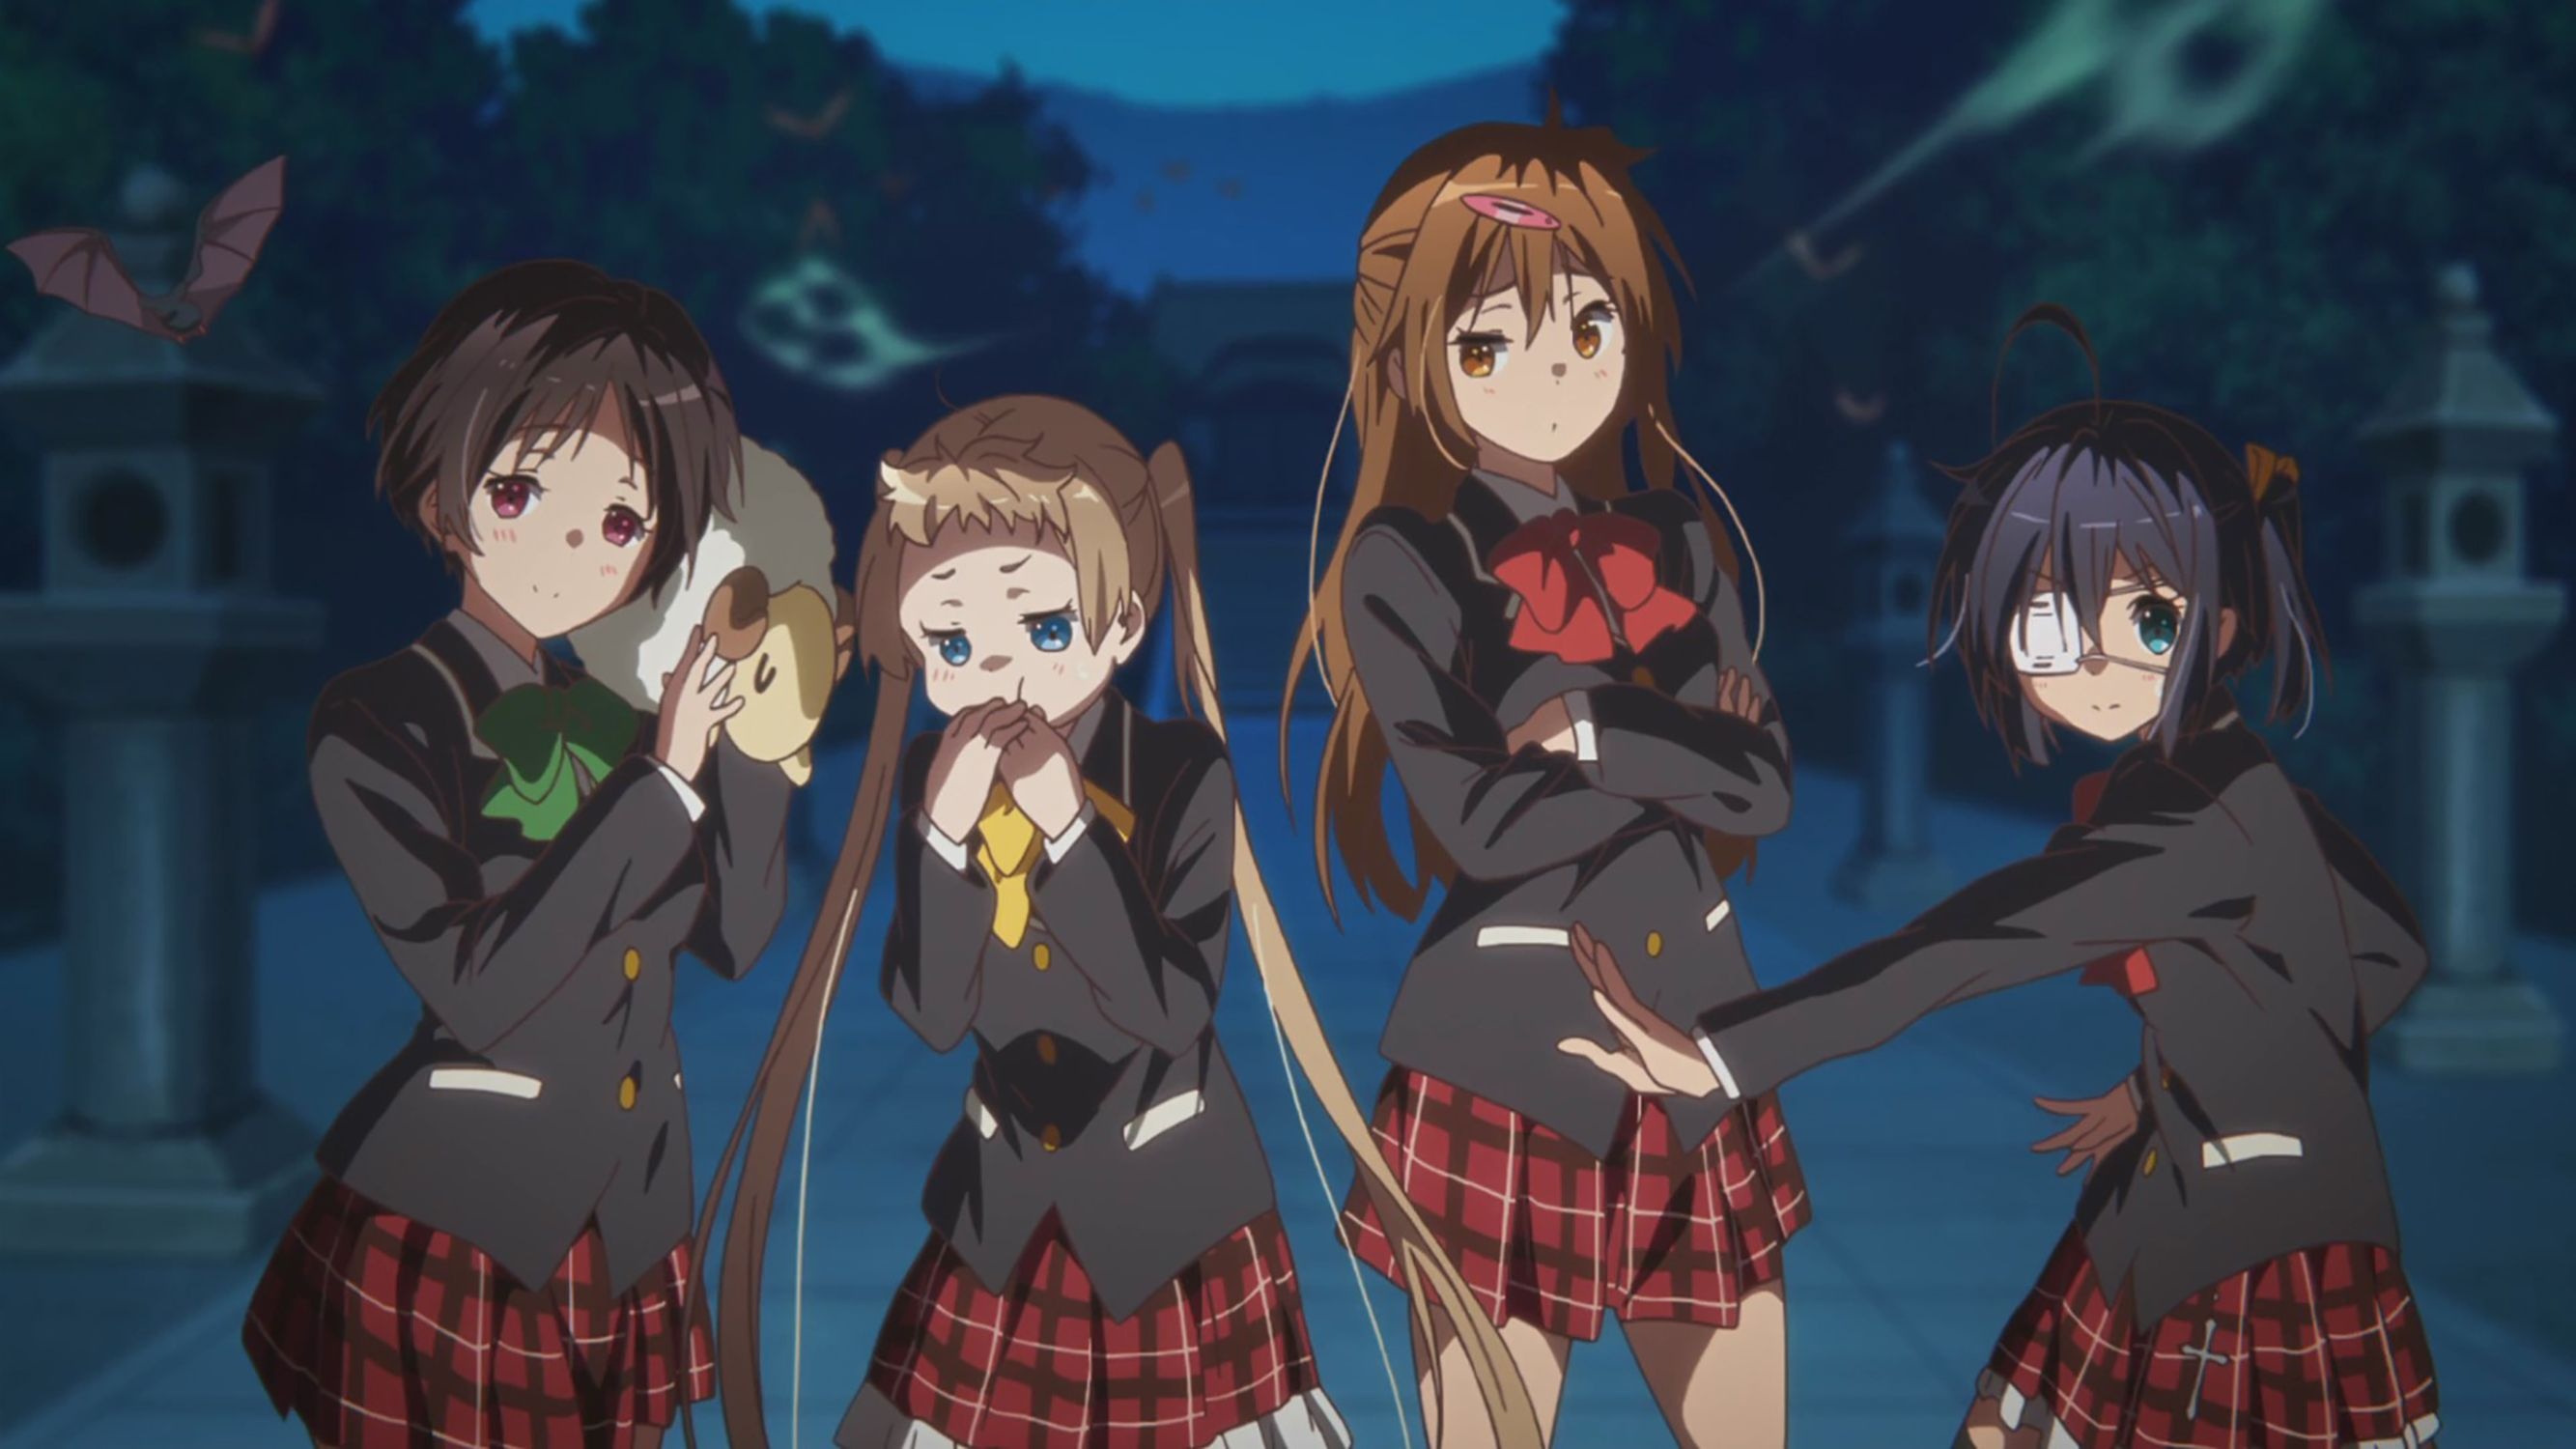 Love, Chunibyo and Other Delusions, Chuunibyou wallpapers, Anime backgrounds, Stylish designs, 2670x1500 HD Desktop